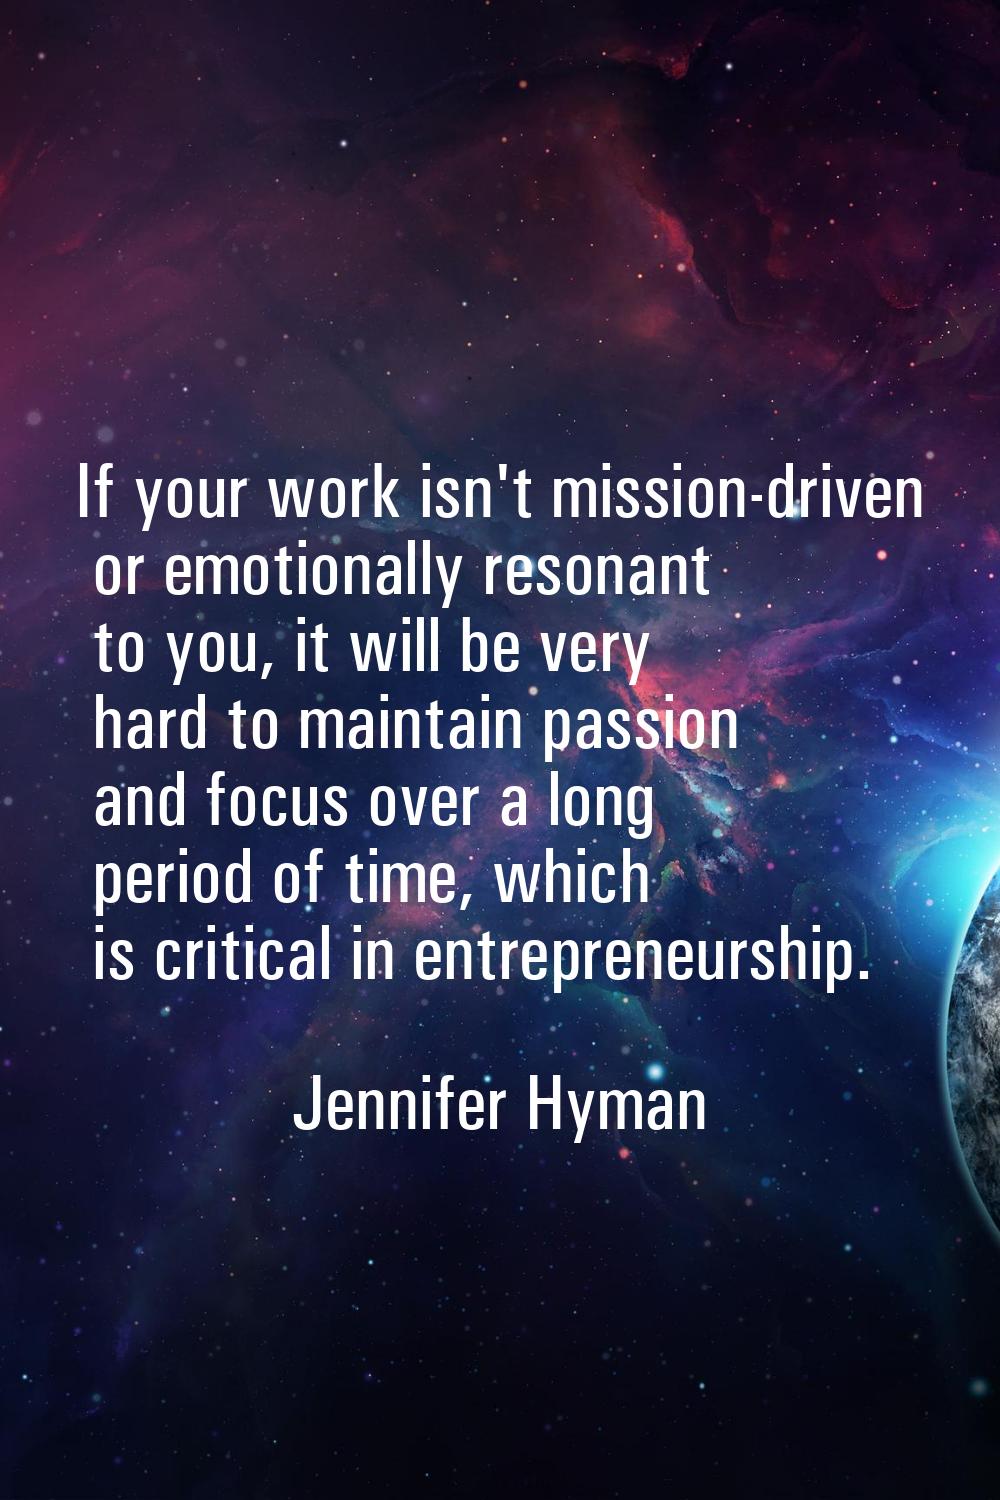 If your work isn't mission-driven or emotionally resonant to you, it will be very hard to maintain 